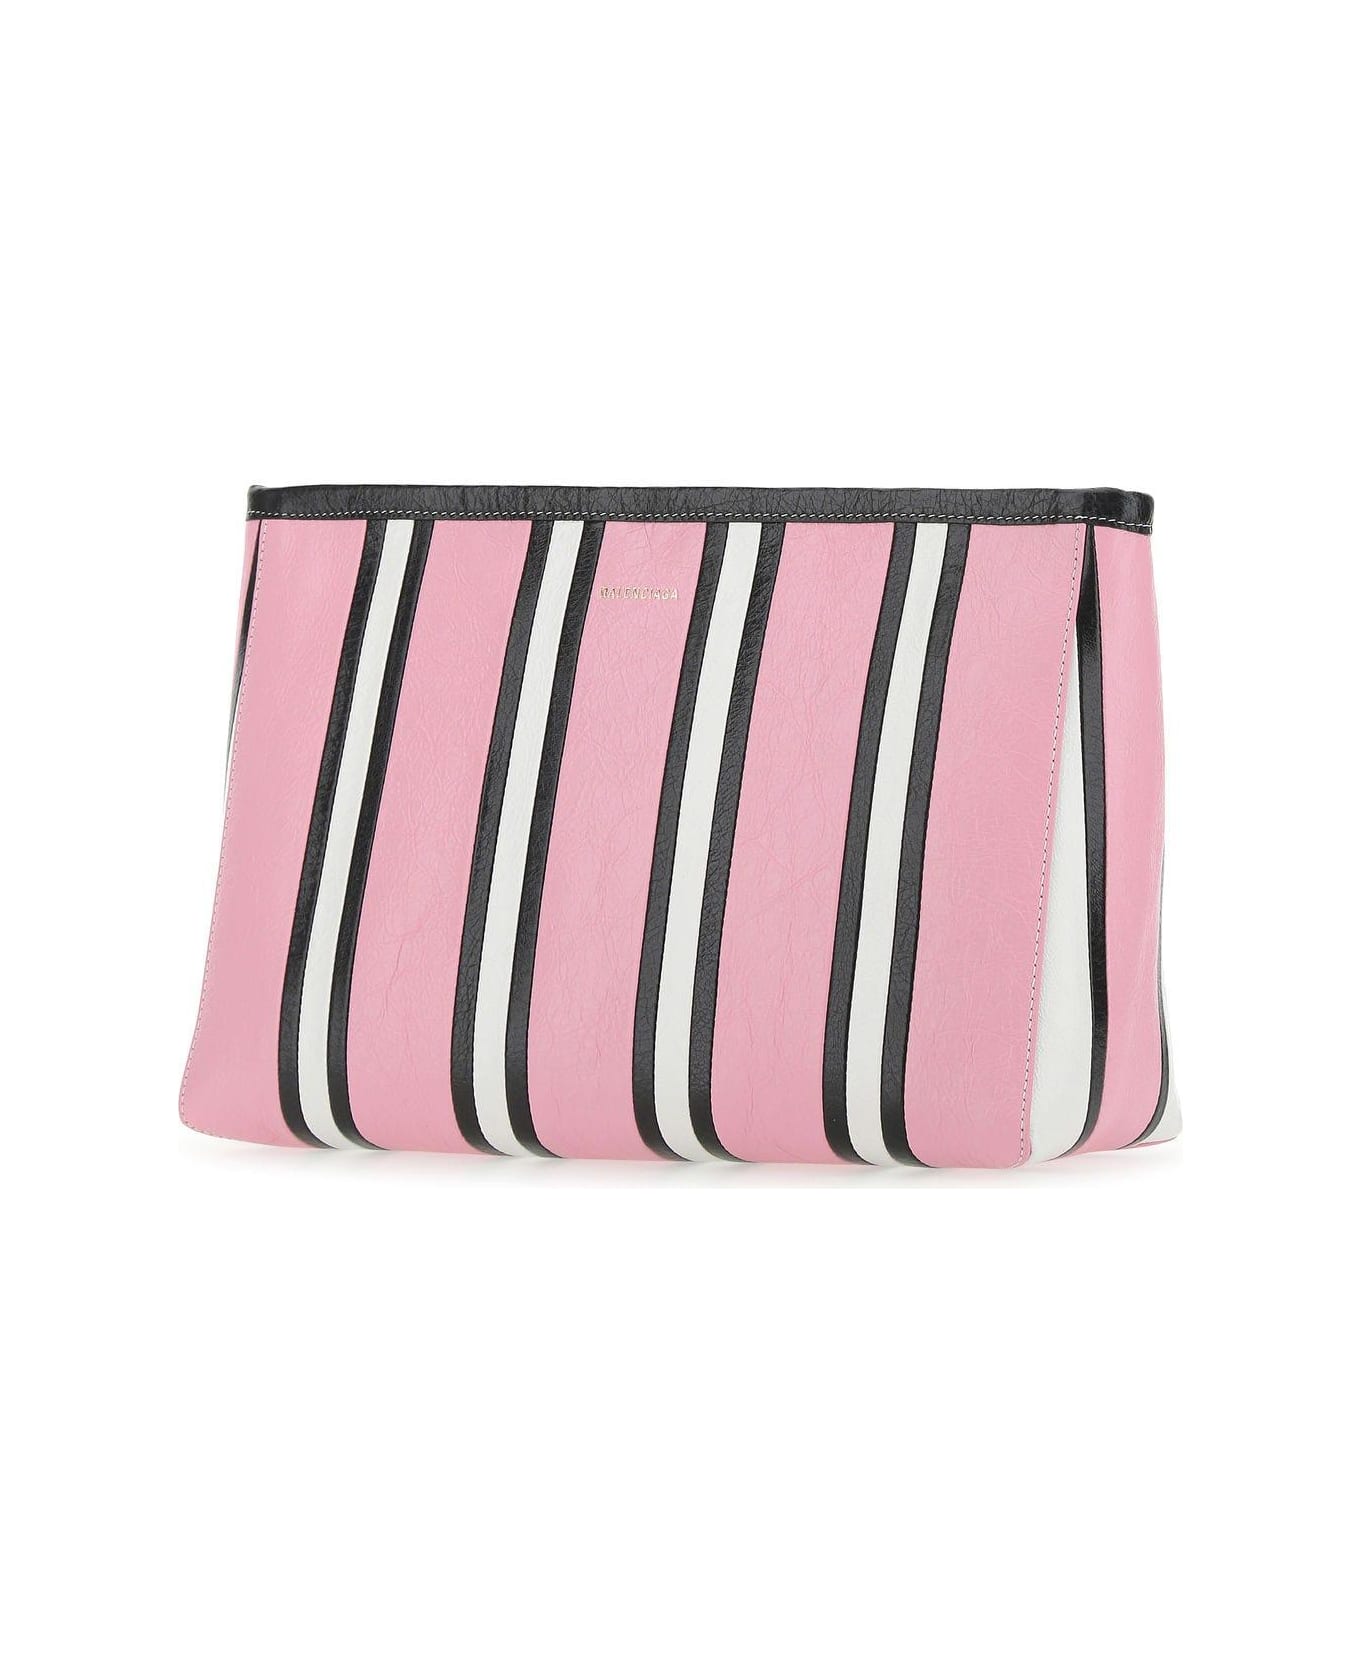 Balenciaga Multicolor Leather Barbes Clutch - PINK クラッチバッグ